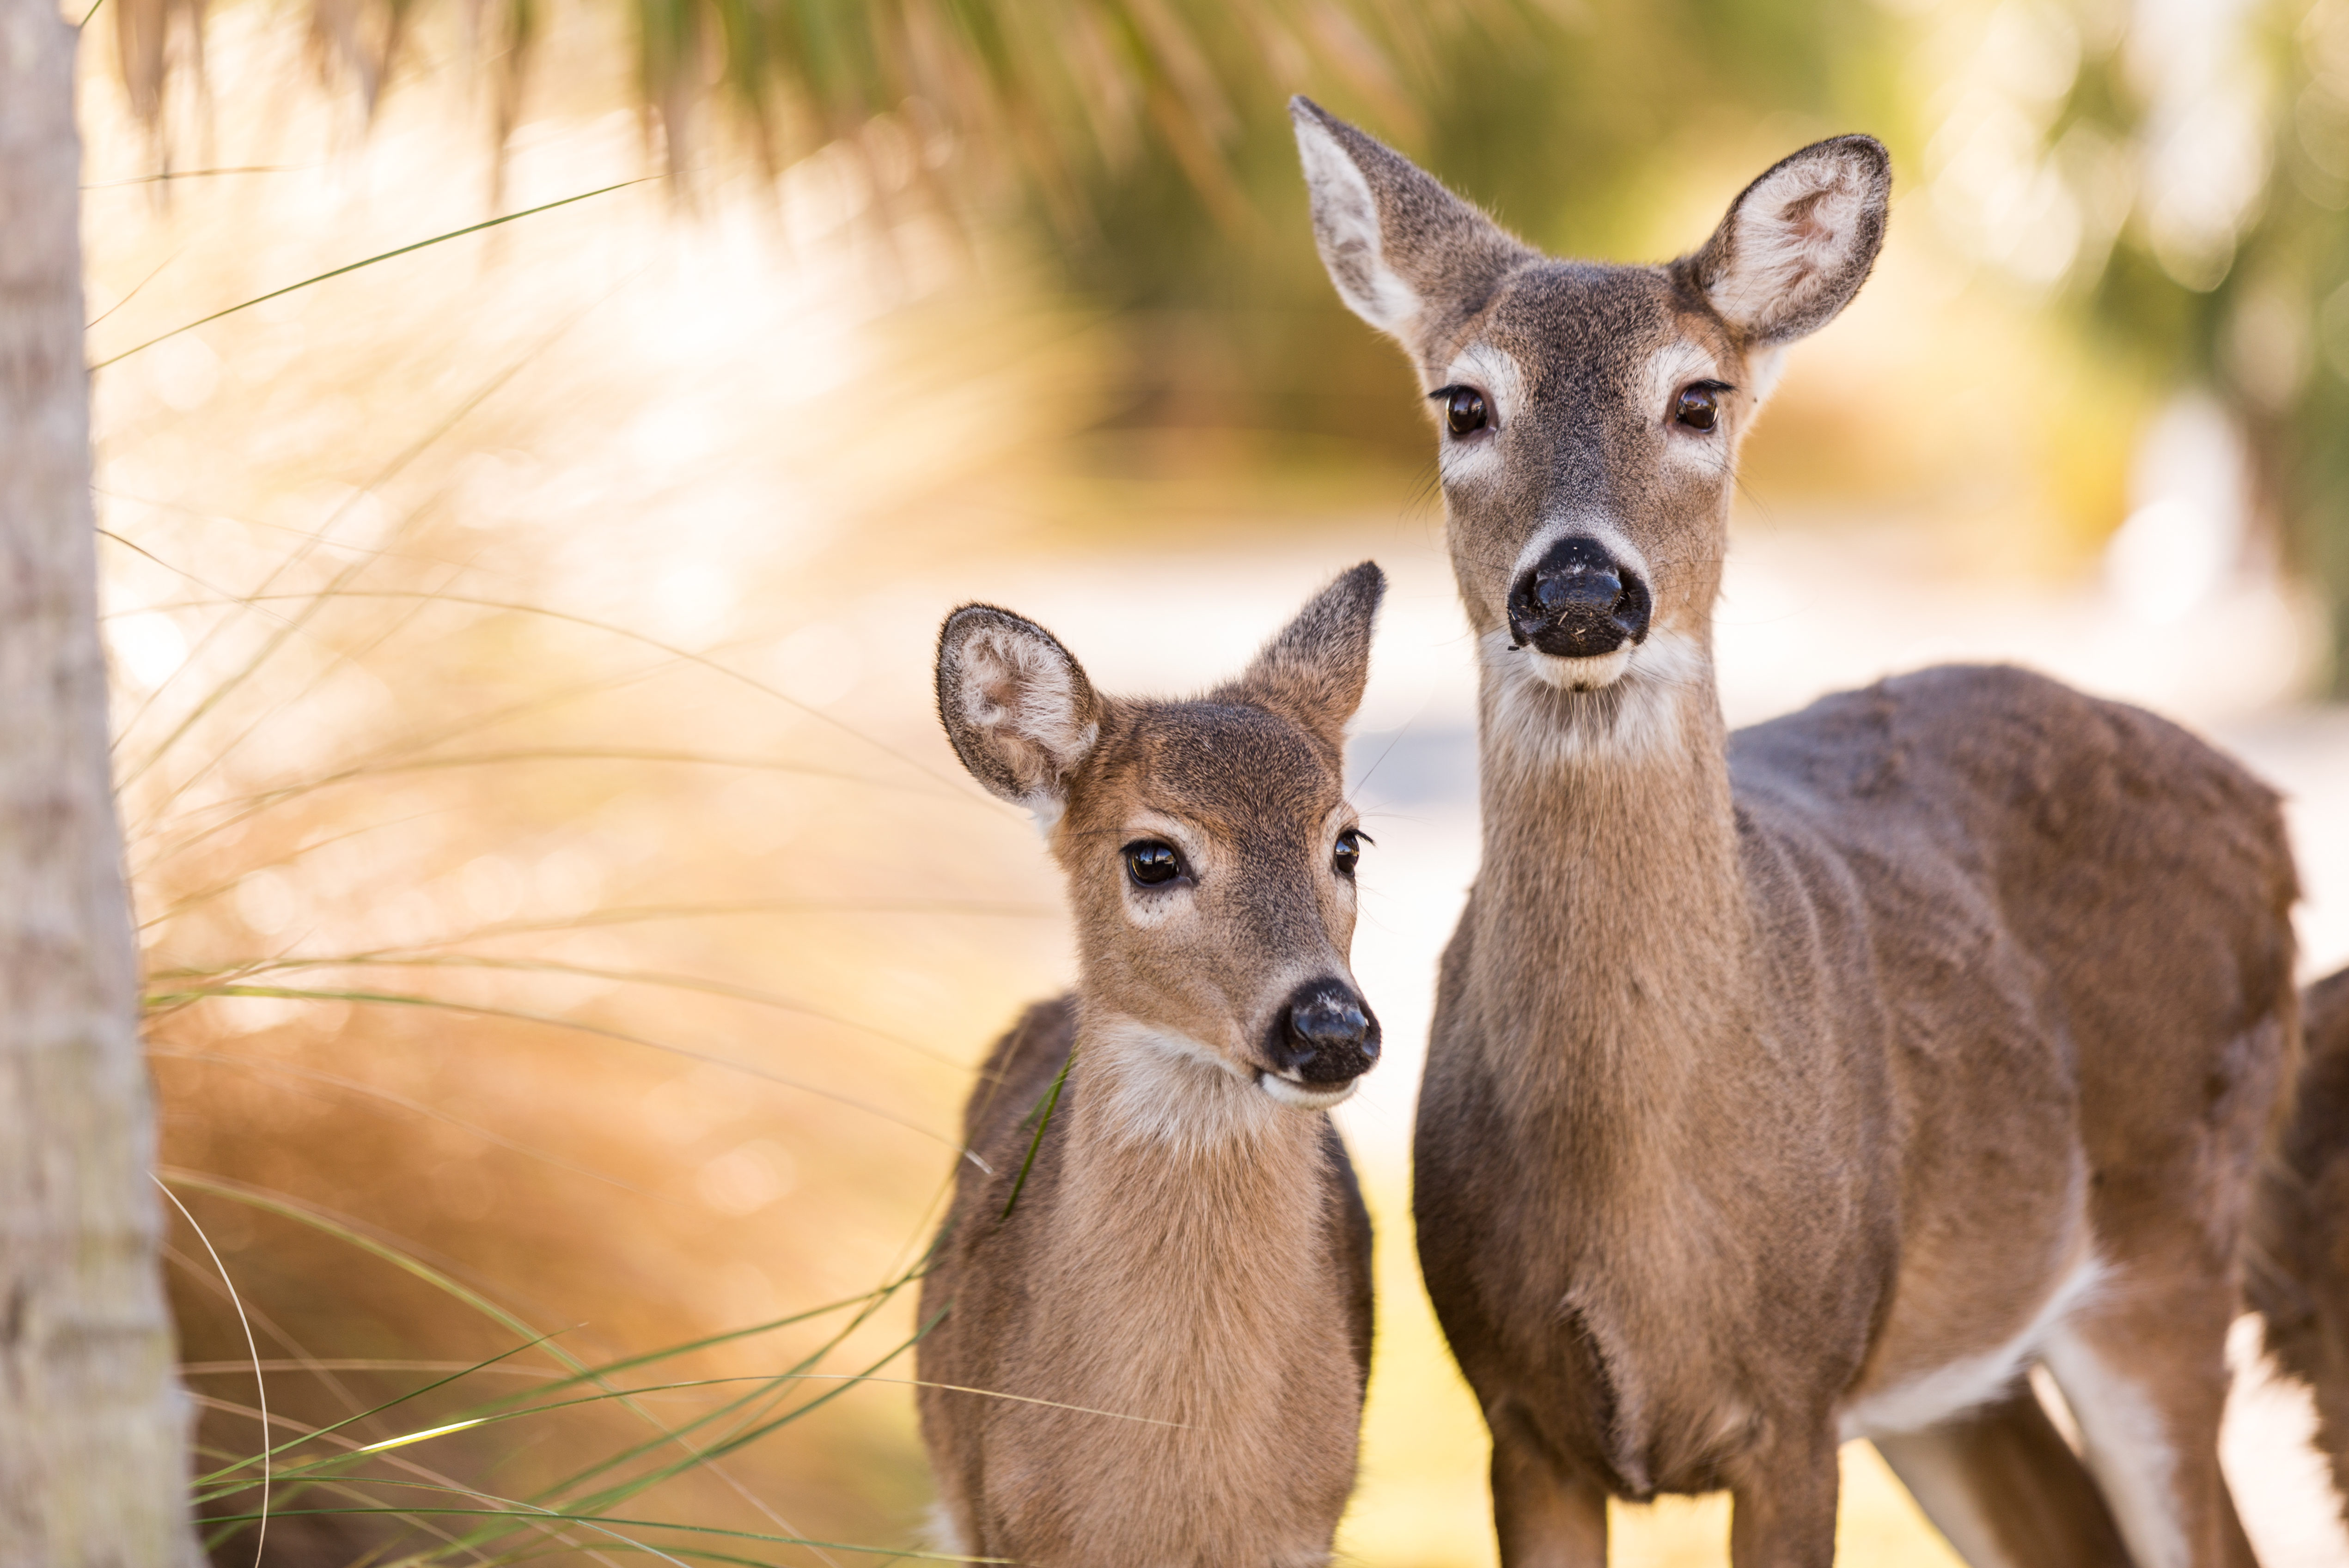 EPA gives thumbs up on vaccine to manage deer populations humanely · A ...